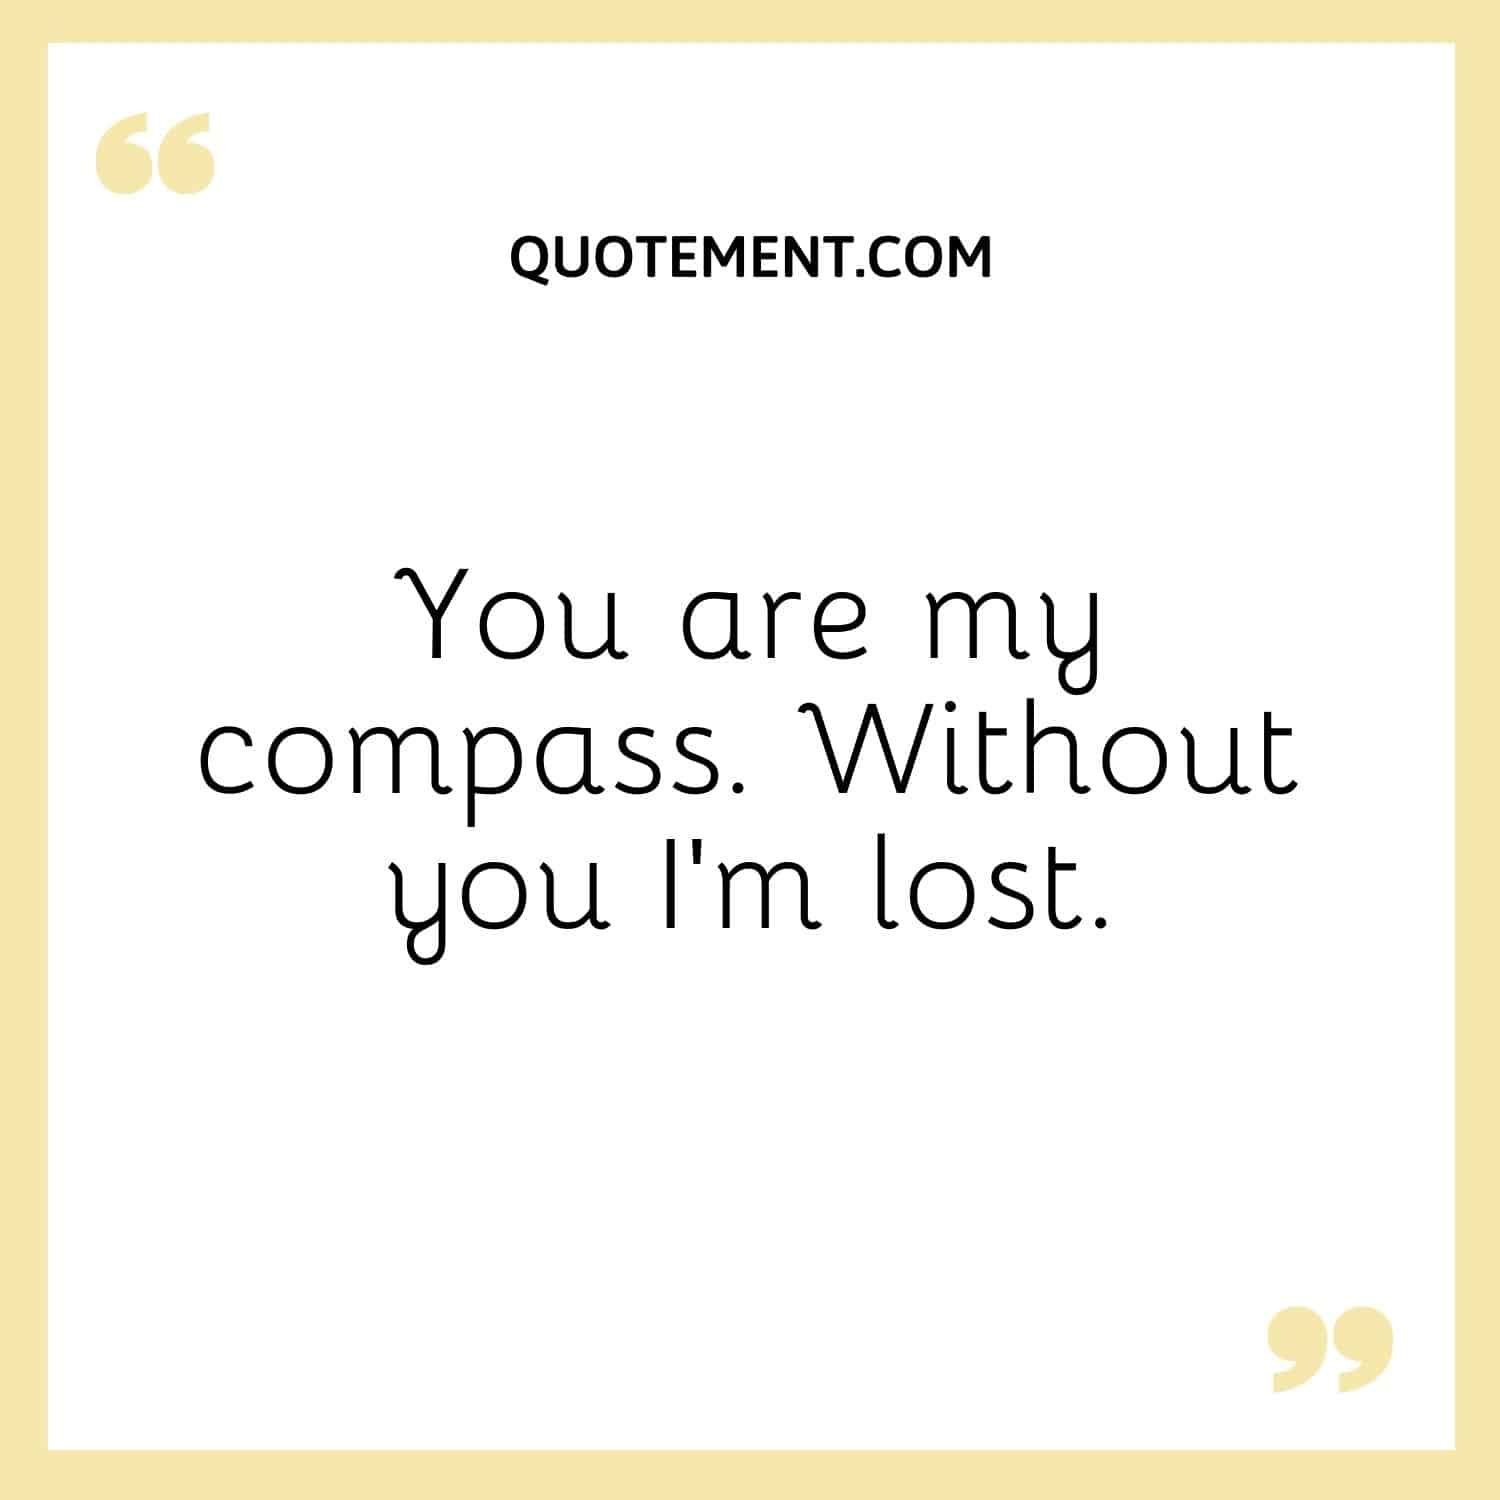 You are my compass. Without you I’m lost